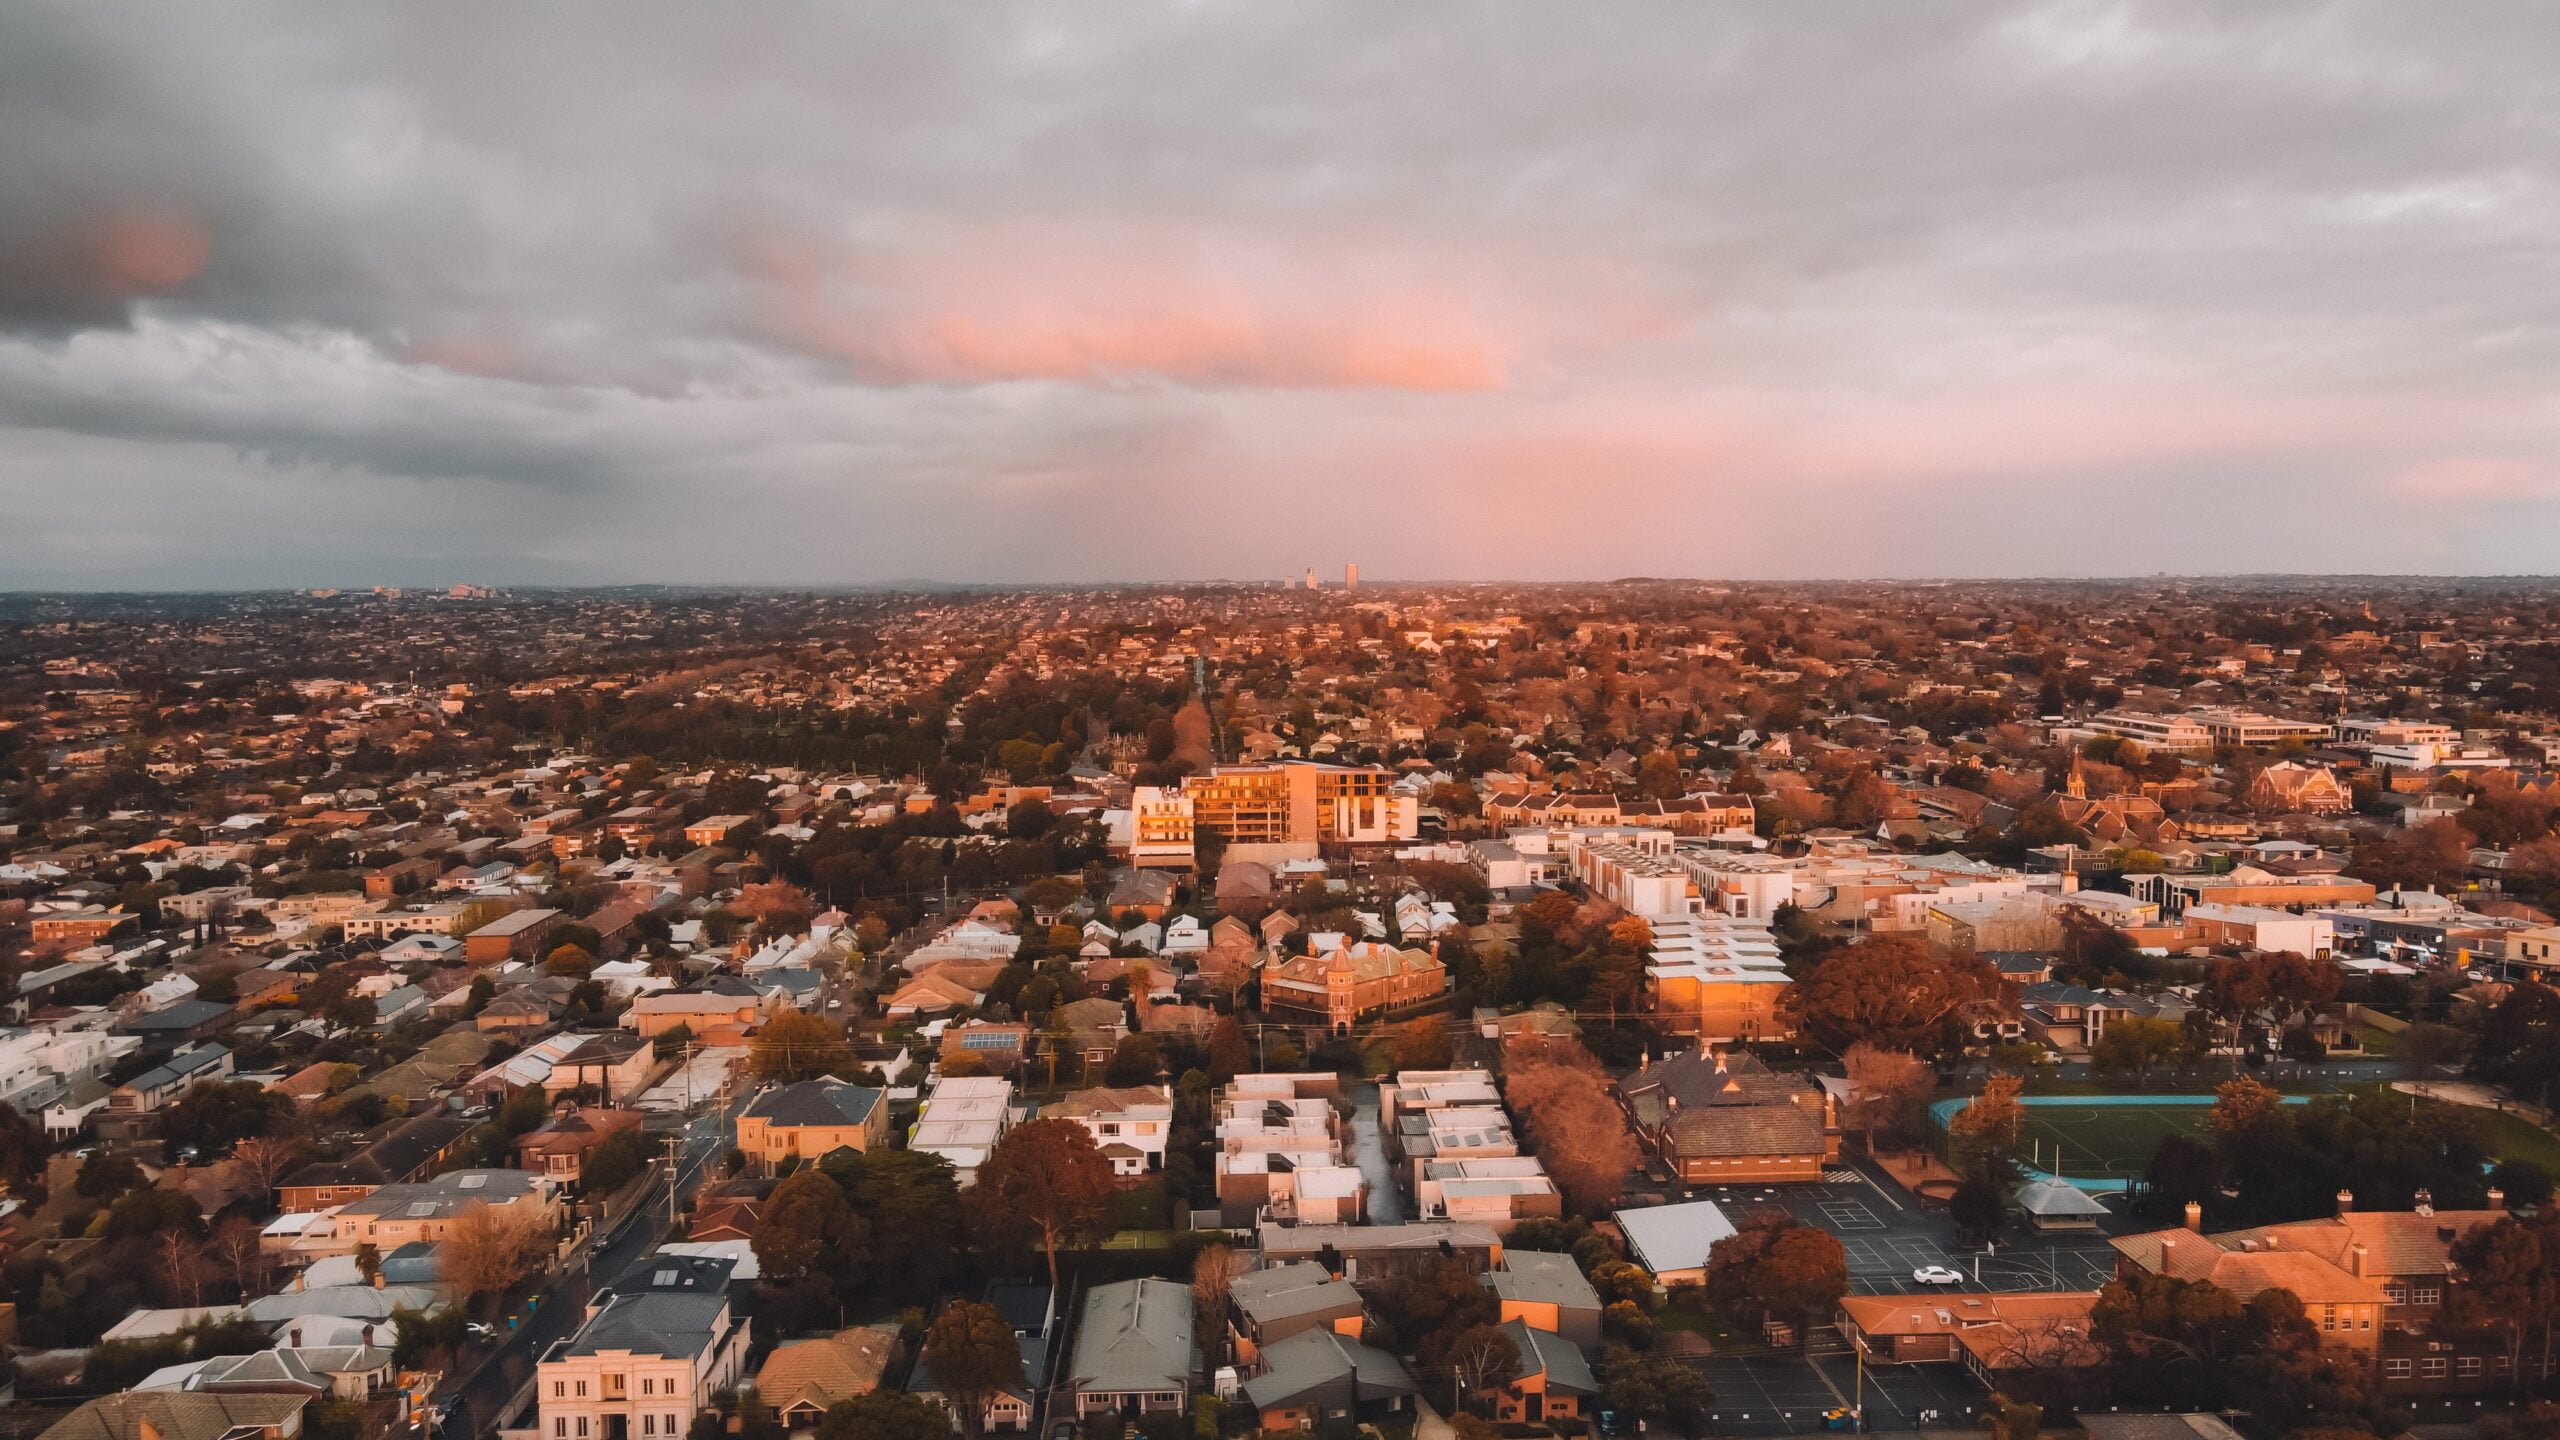 A panoramic view of Australian rooftops and housing at sunset